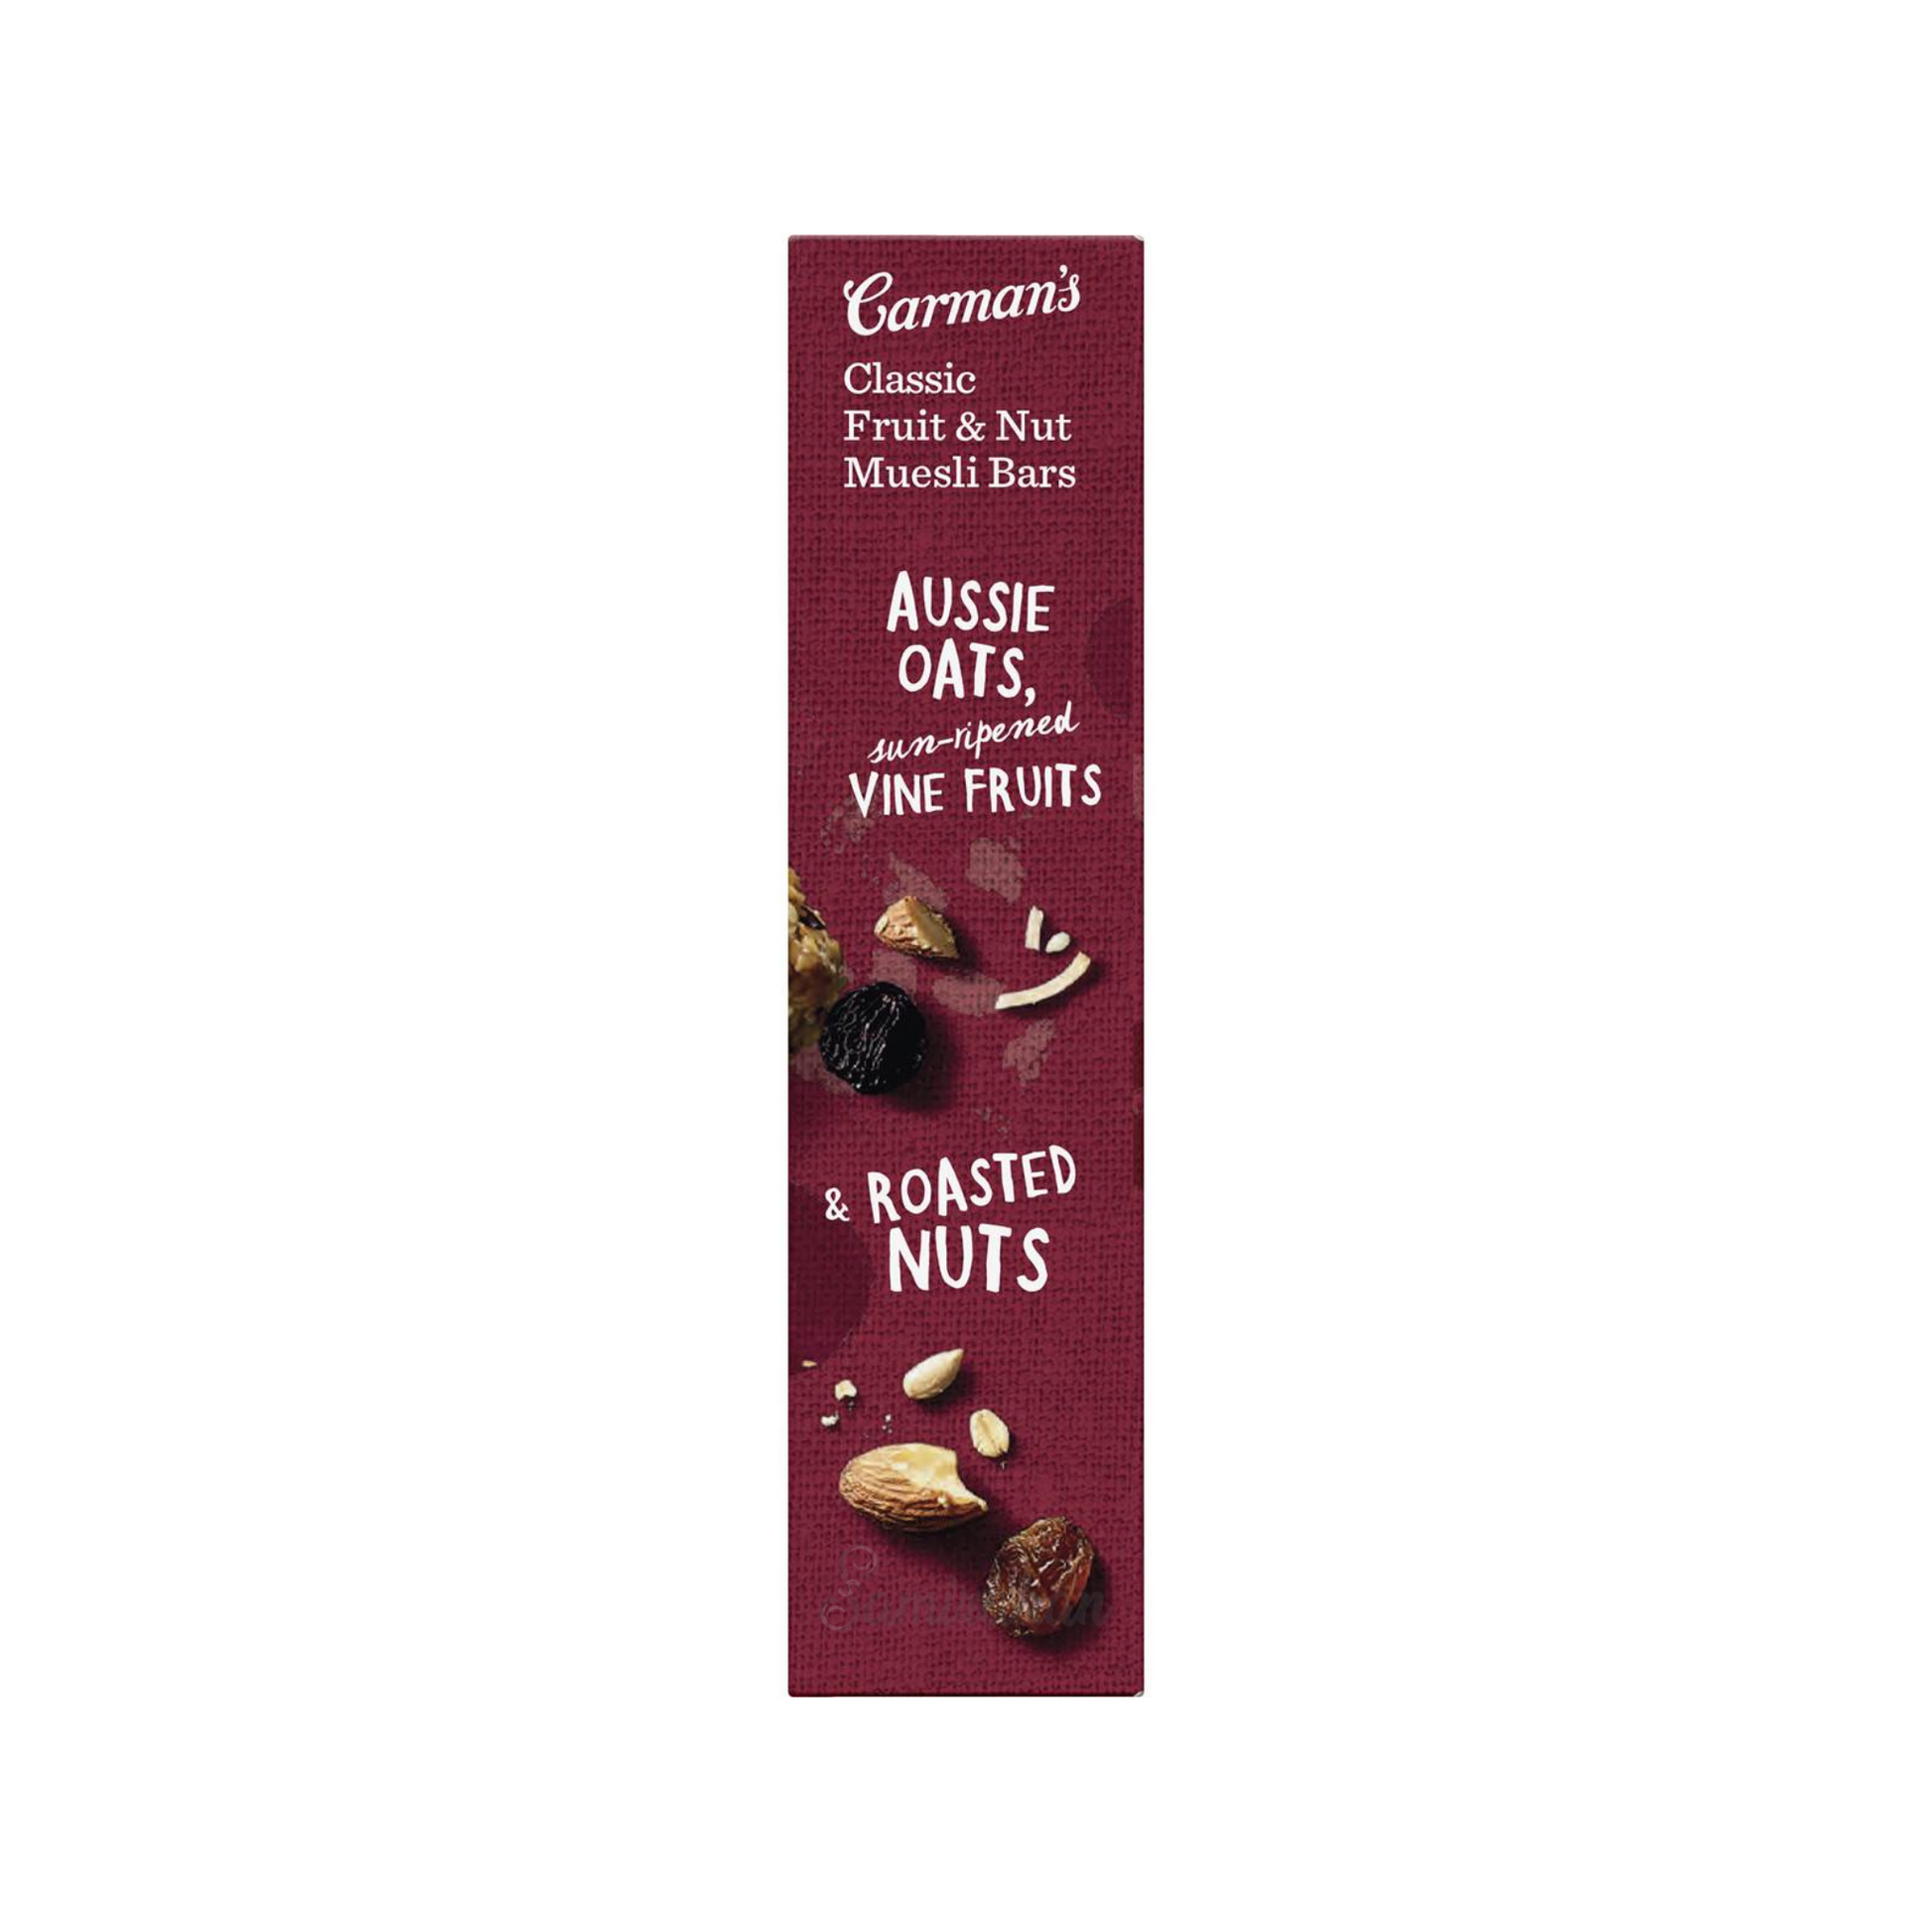 Carman's Classic Fruit & Nut Muesli Bars are made with natural ingredients, Aussie oats, sun-ripened vine fruits & roasted nuts. Source of fibre & high in whole grain. Australian Health Star Rating of 4. Halal certified. Vegan. Best genuine foreign imported Aussie health food healthy nutrition bar in Dhaka Bangladesh.